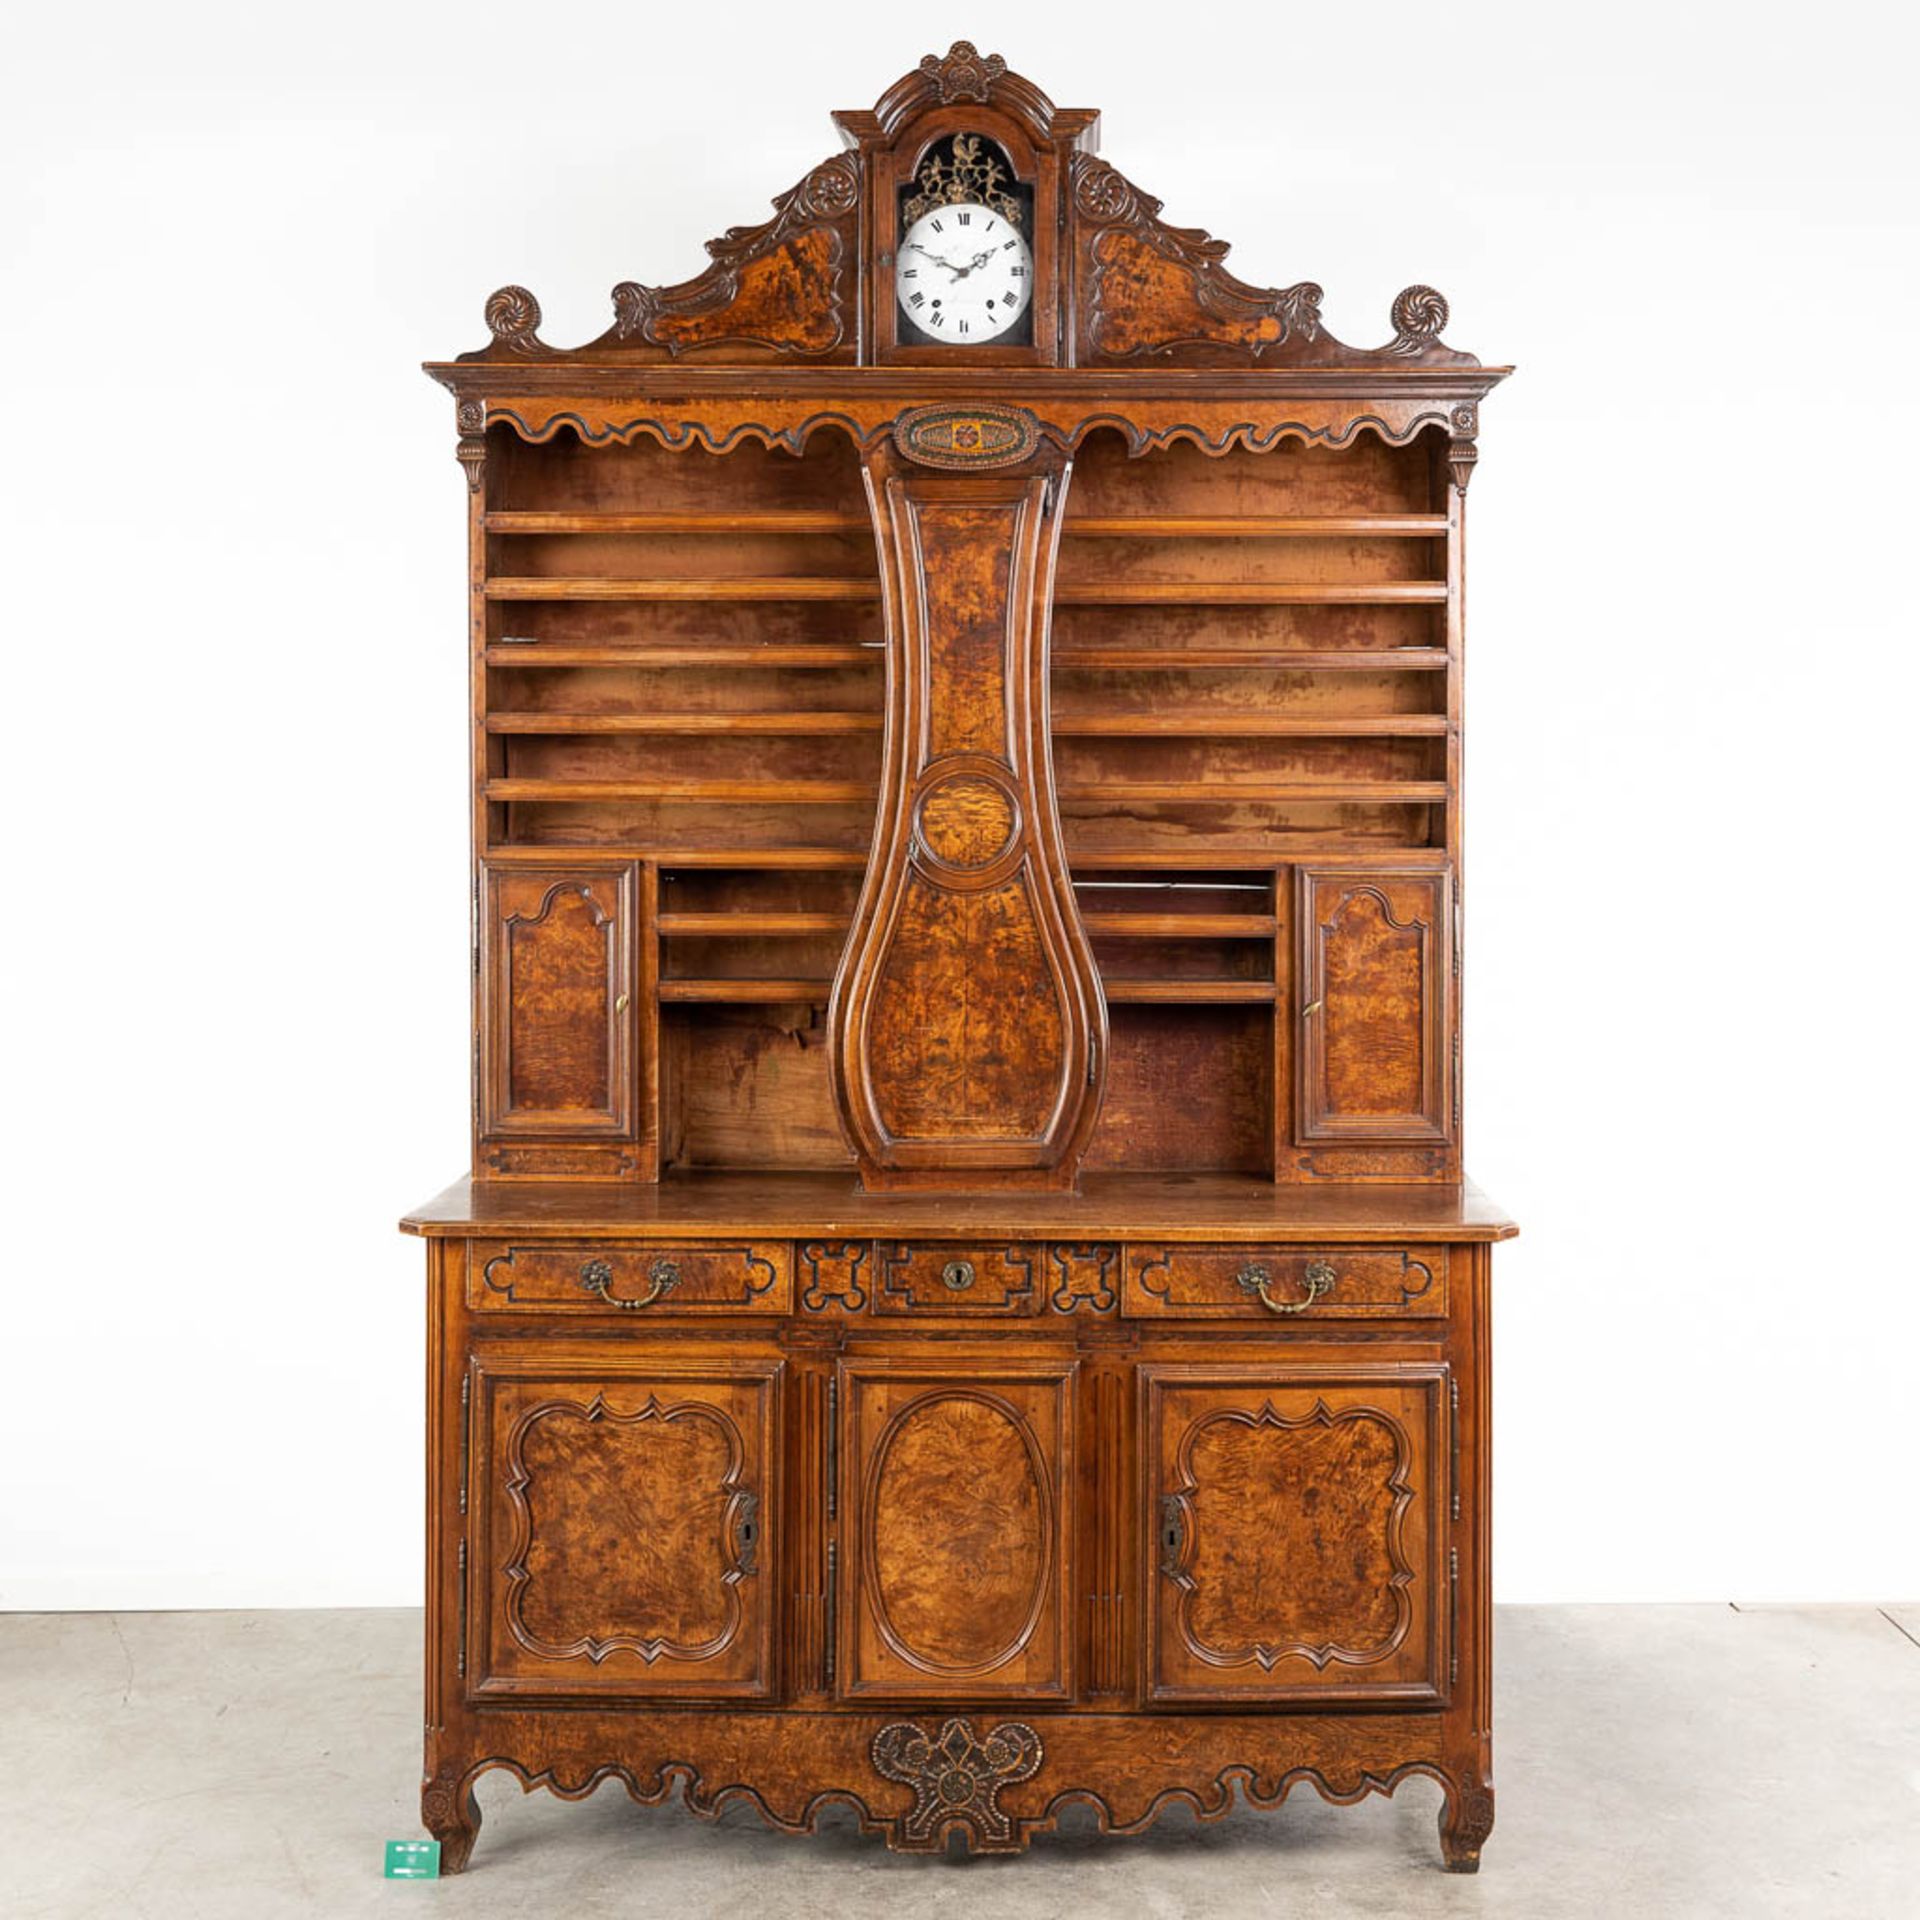 A Buffet, vaisselier, walnut with a standing clock, France, 18th C. (L: 60 x W: 180 x H: 298 cm) - Image 2 of 22